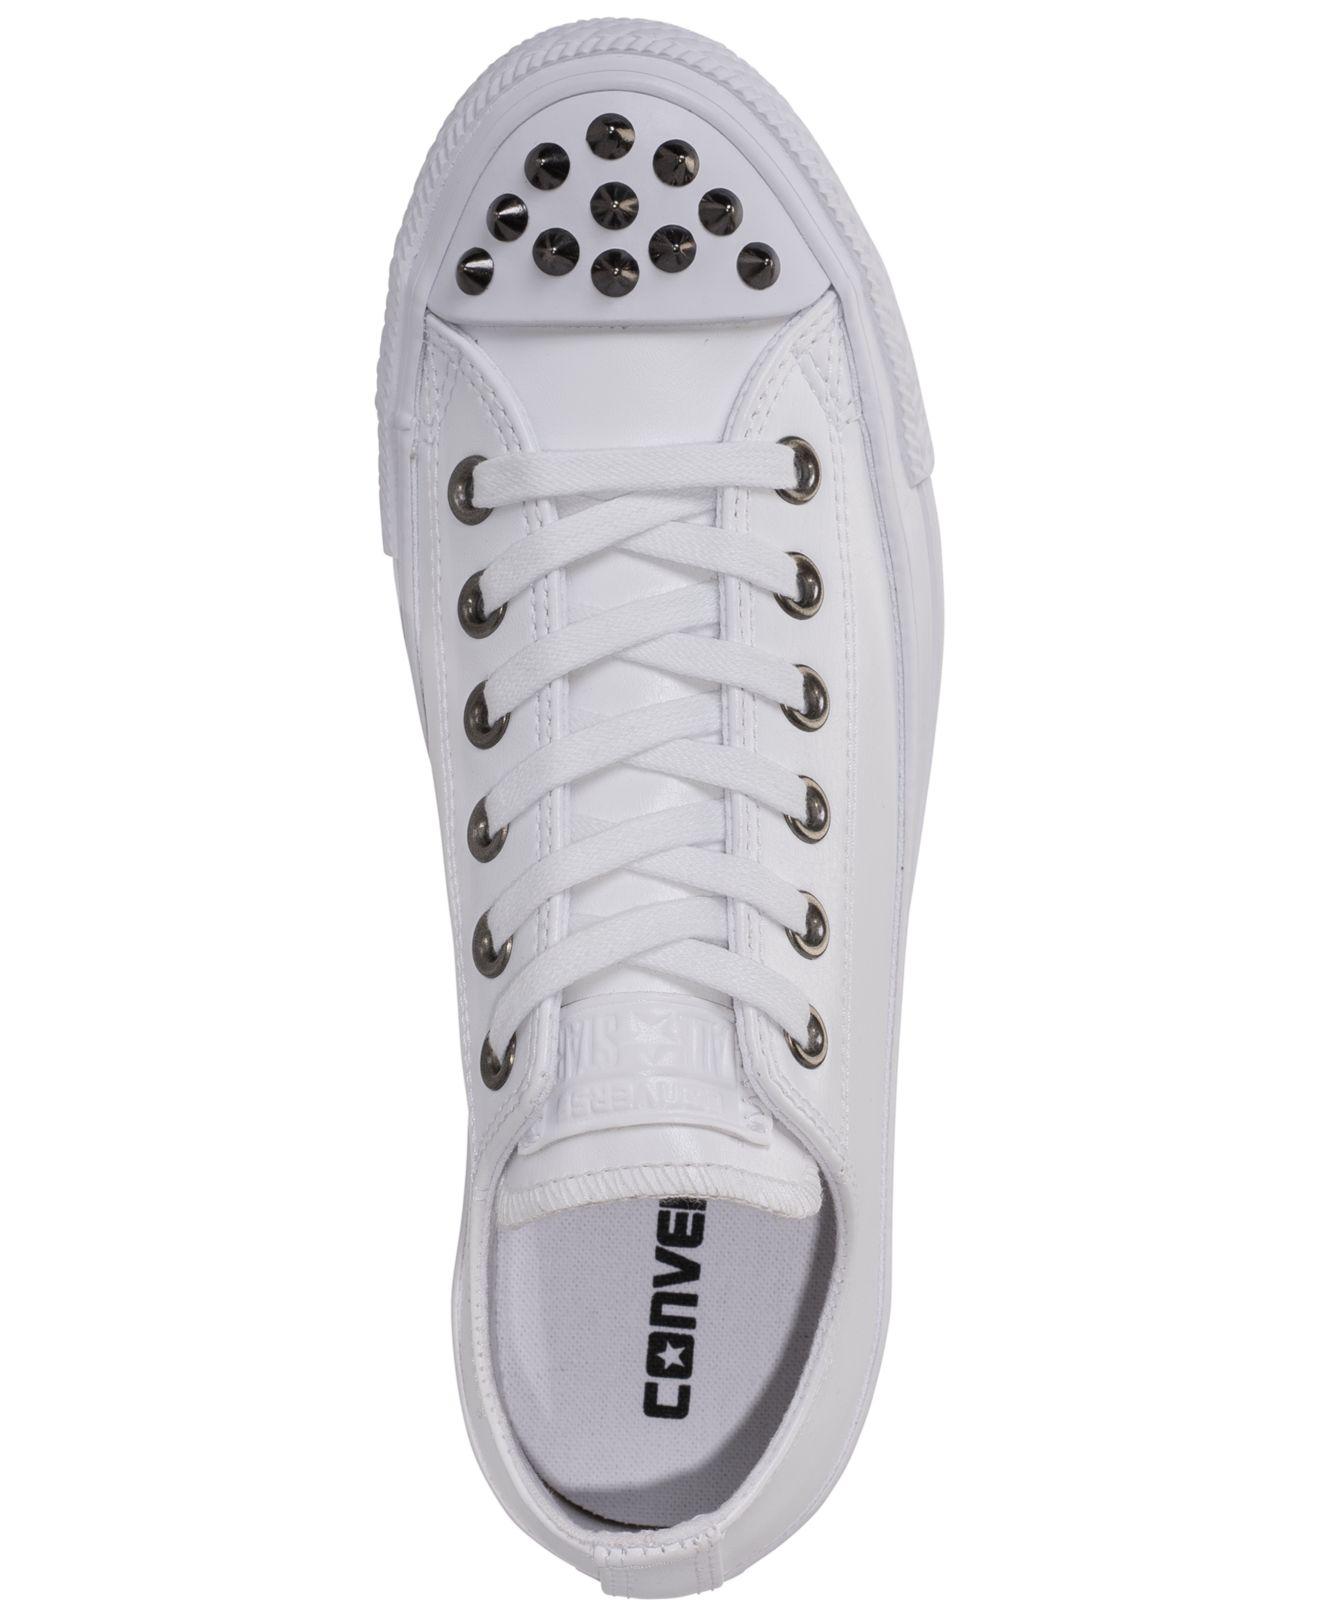 Chuck Taylor Ox Stud Casual Sneakers 